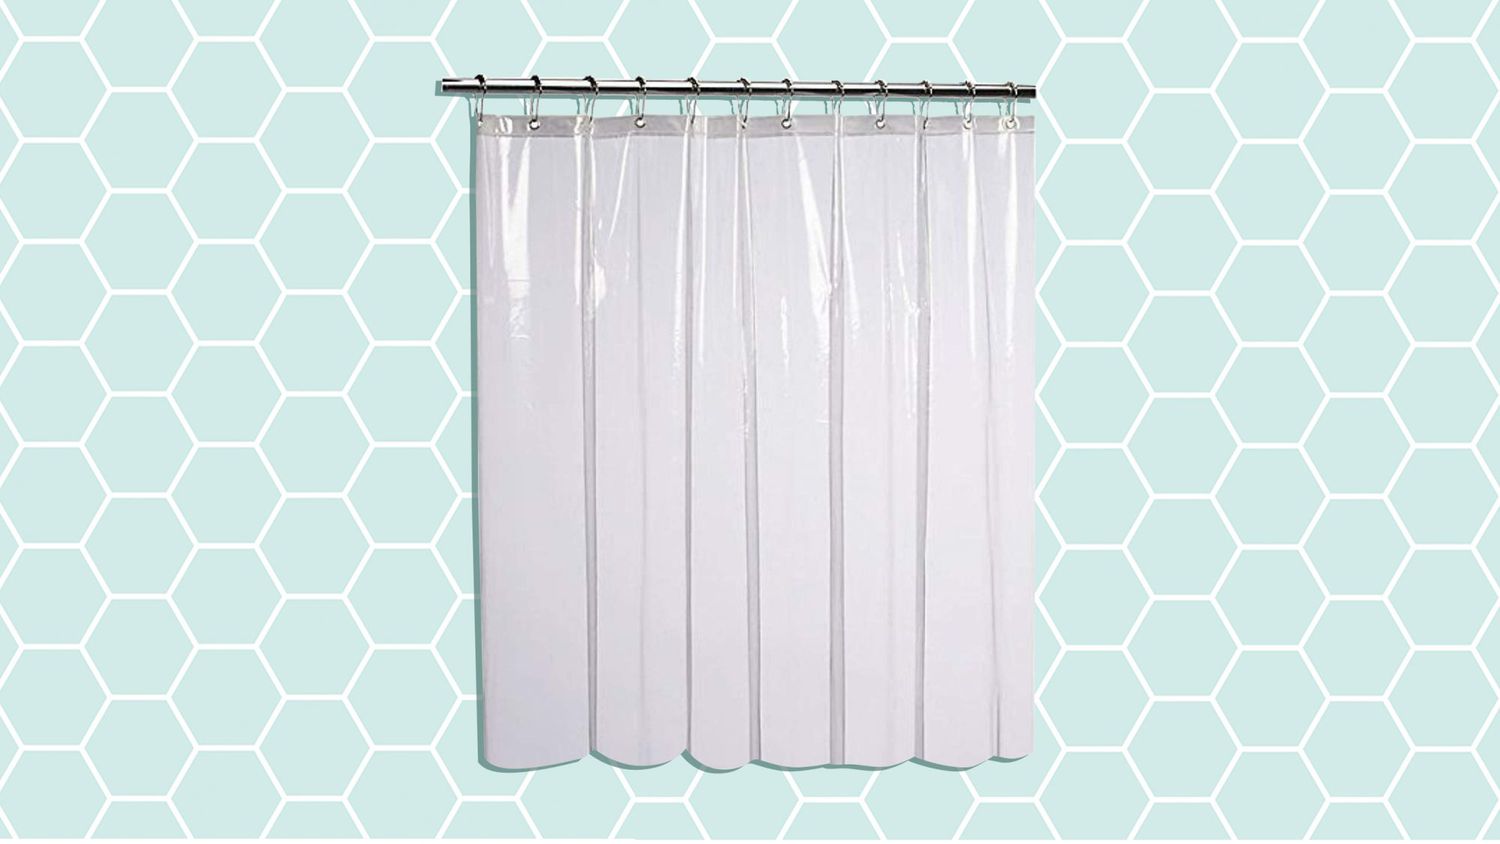 Furlinic Grey Shower Curtain Mould Proof Resistantand Waterproof Washable Polyester Bath Curtains with Weight Tape for Wetroom 35x72 Inch.